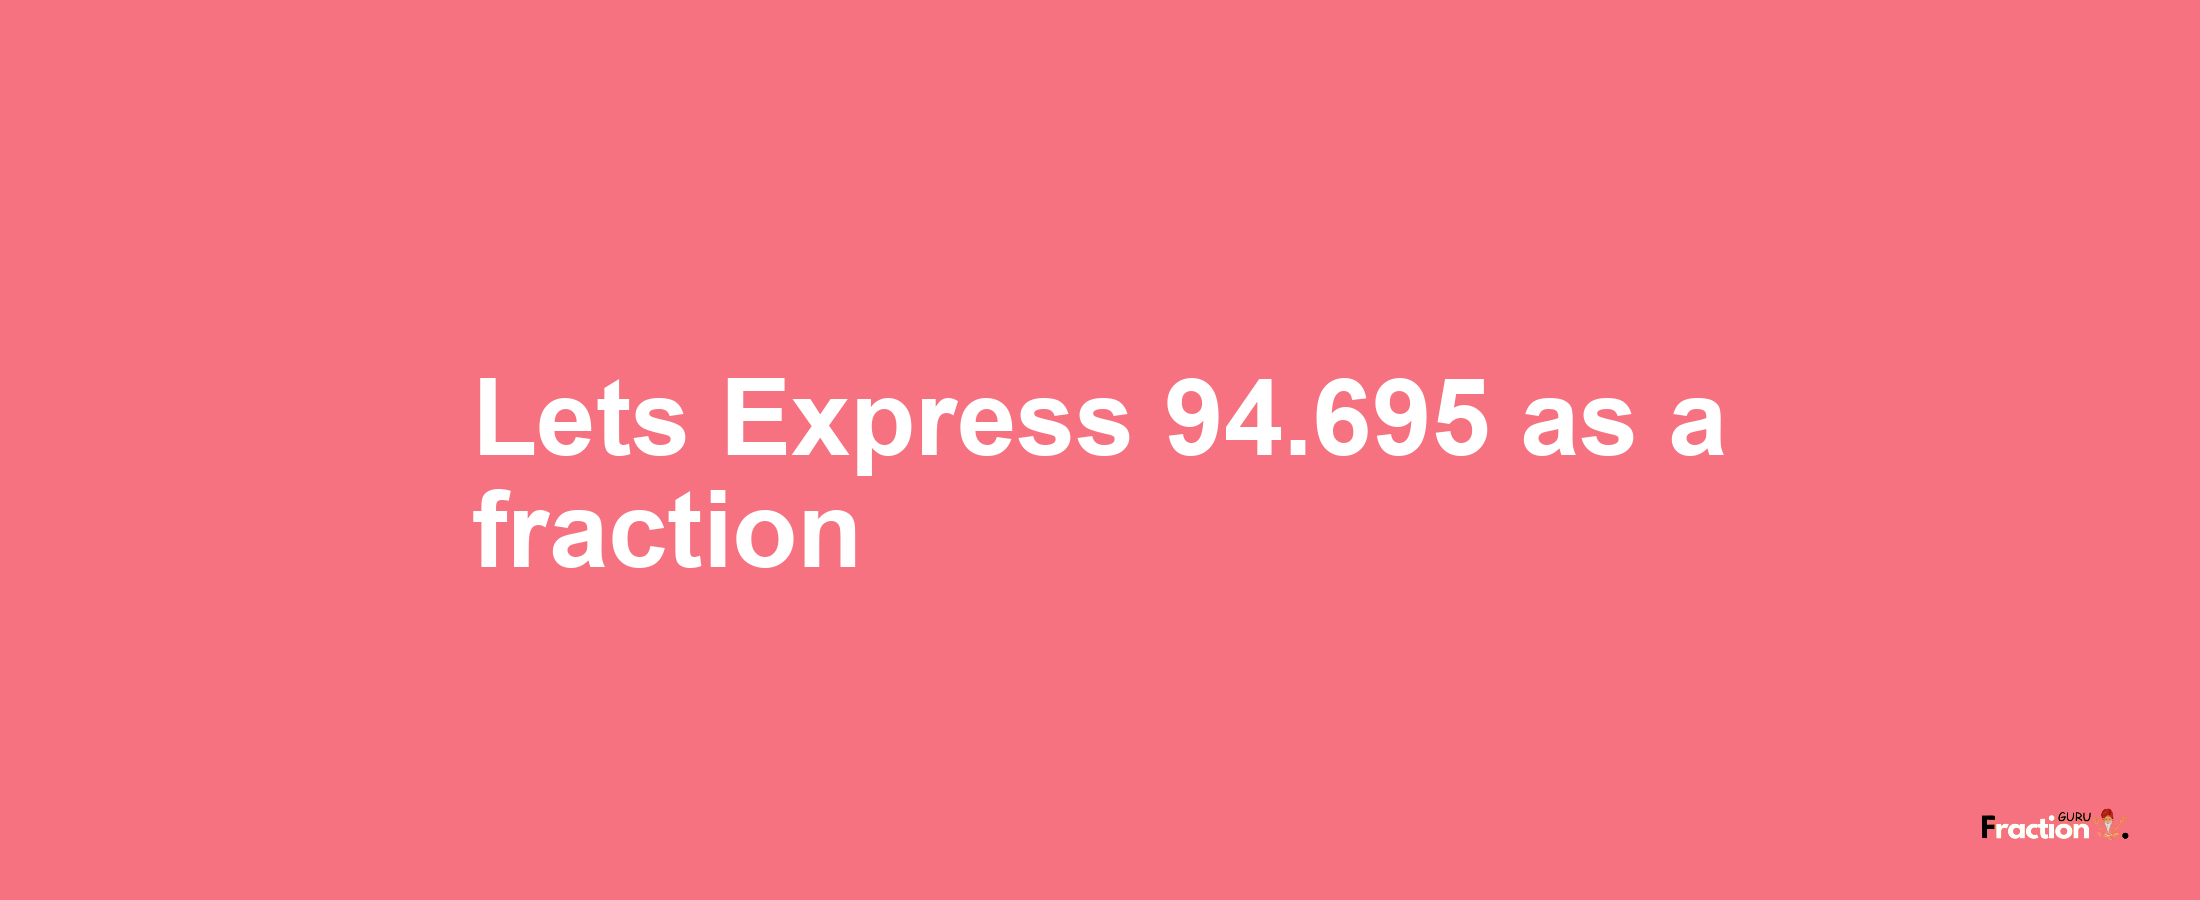 Lets Express 94.695 as afraction